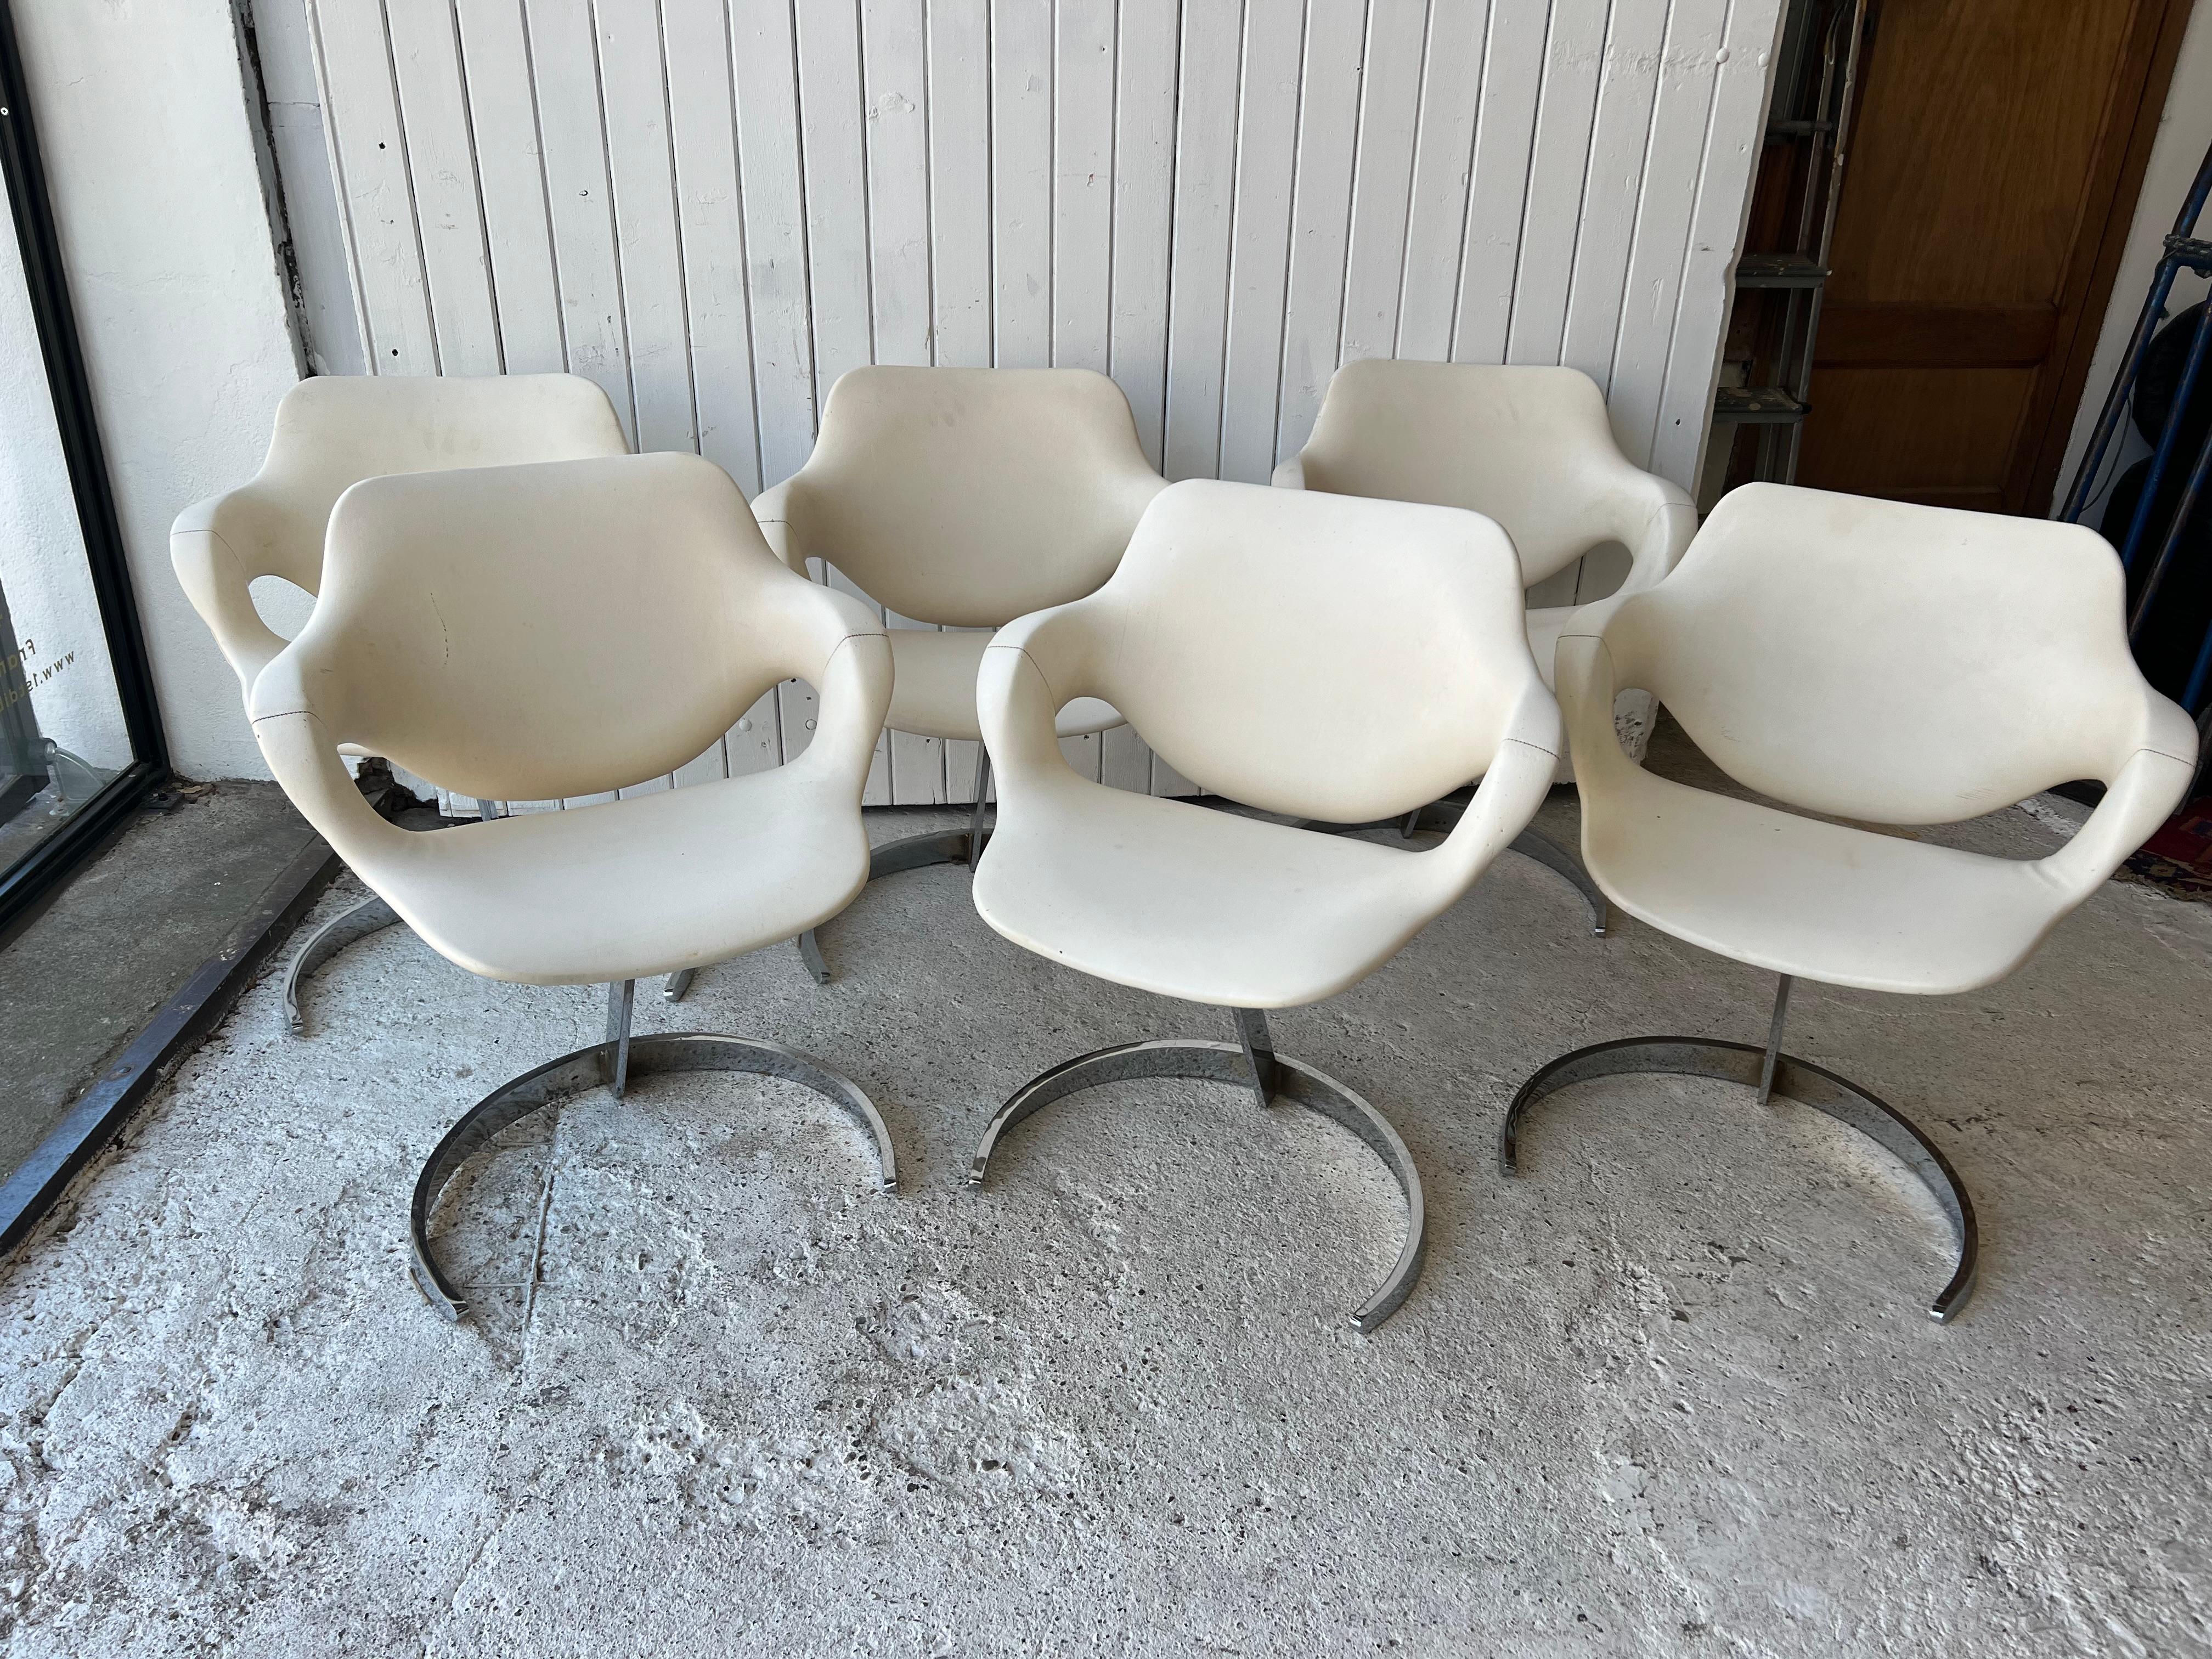 6 Boris Tabacoof Scimitar dining chairs by MMM , France 1960/70
Tabacoff is well known for futuristic looking pieces in 1960’s

The seat is tipically original in a white skay 1970’s

The good choice is to buy original chairs in the actual condition